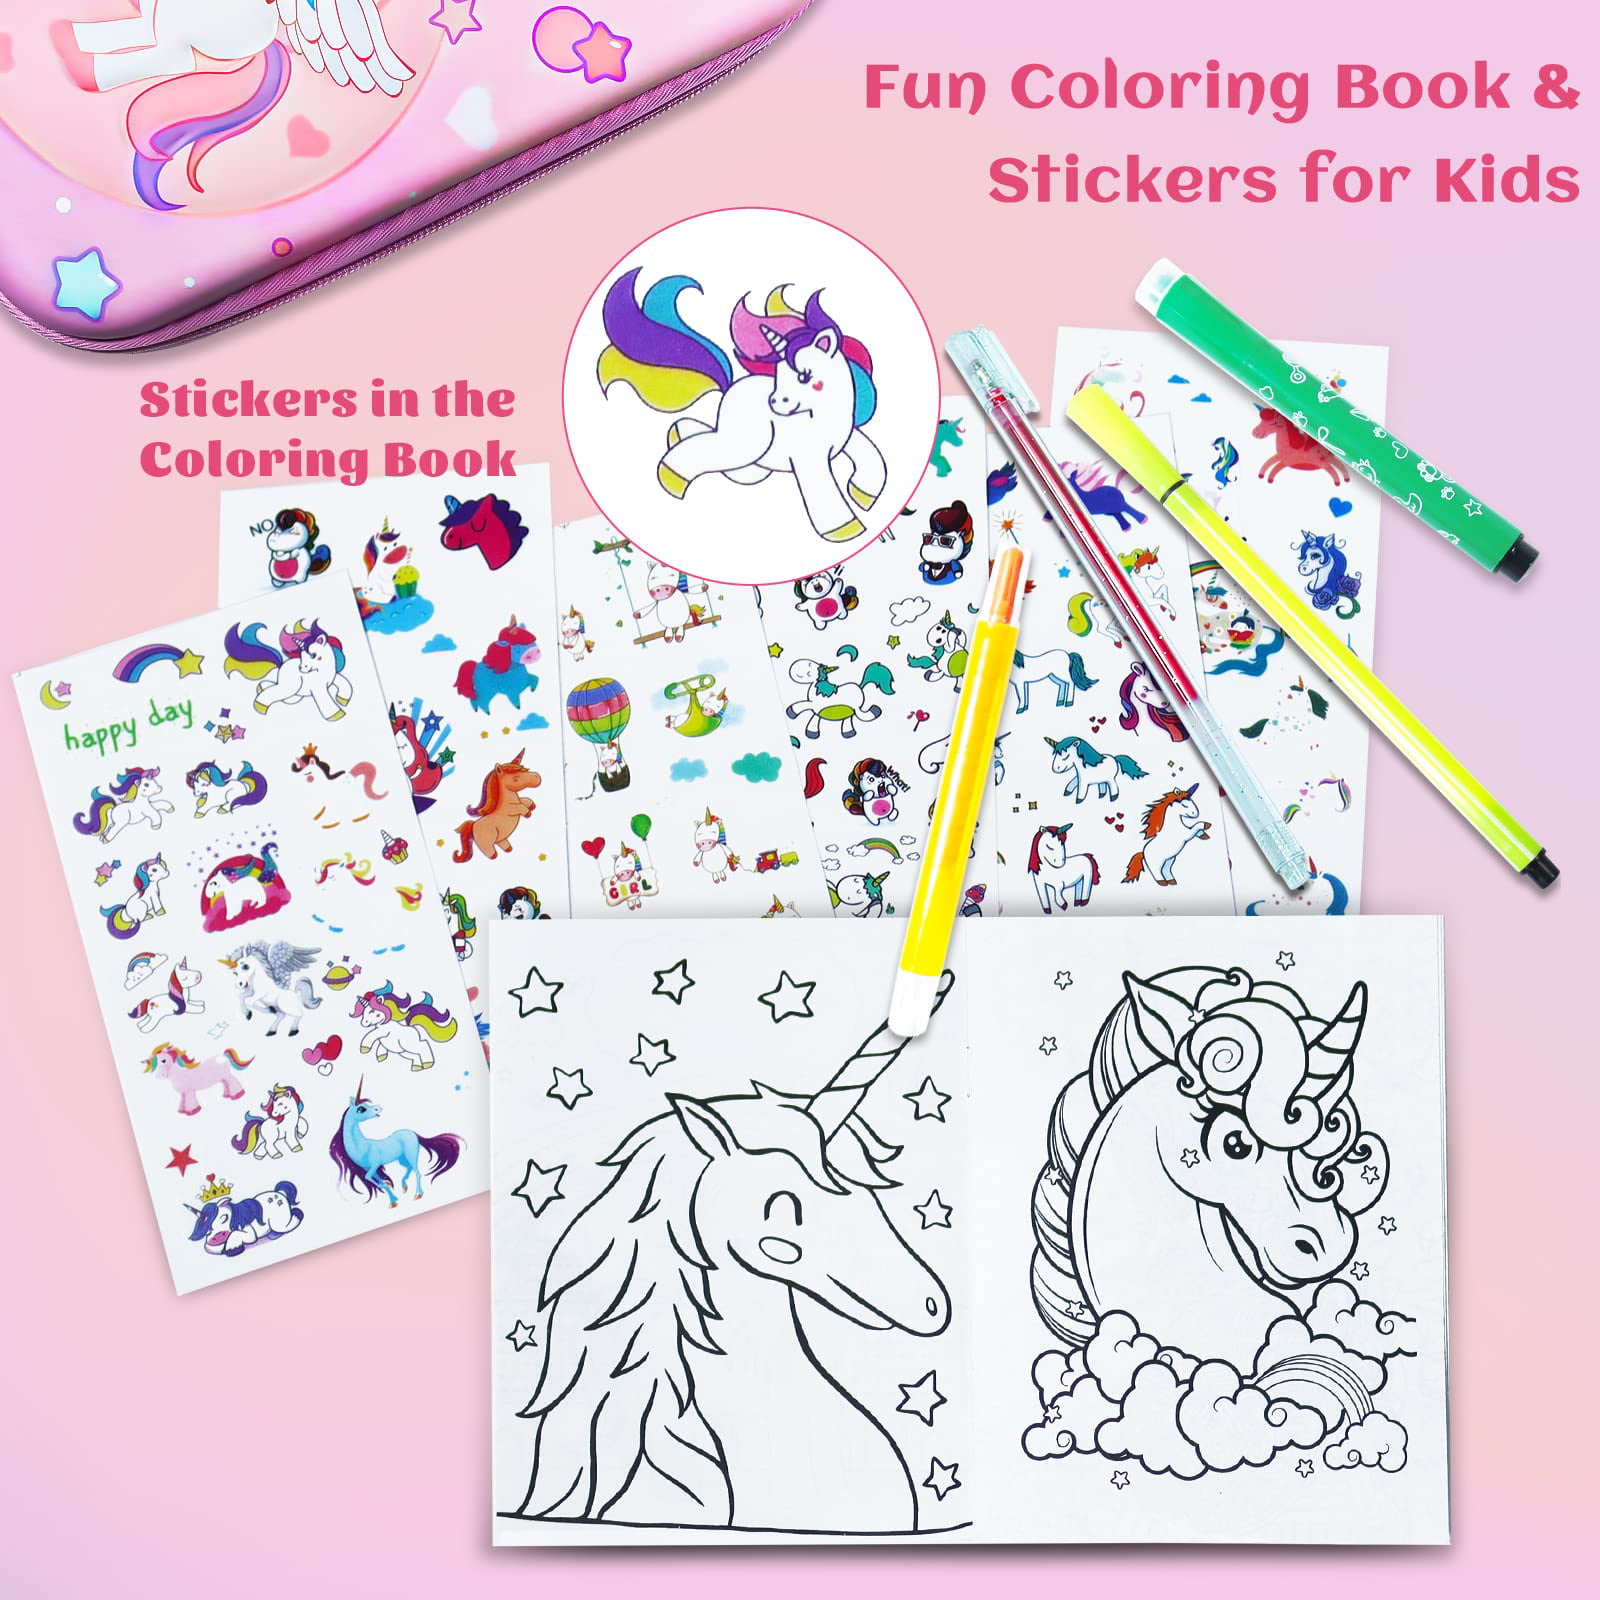 Unicorns Gifts for Girls 5 6 7 8 9 Year Old, Coloring Markers Set with  Unicorn Pencil Case, Unicorn Art Supplies for Art Coloring, Craft Drawing  Toy